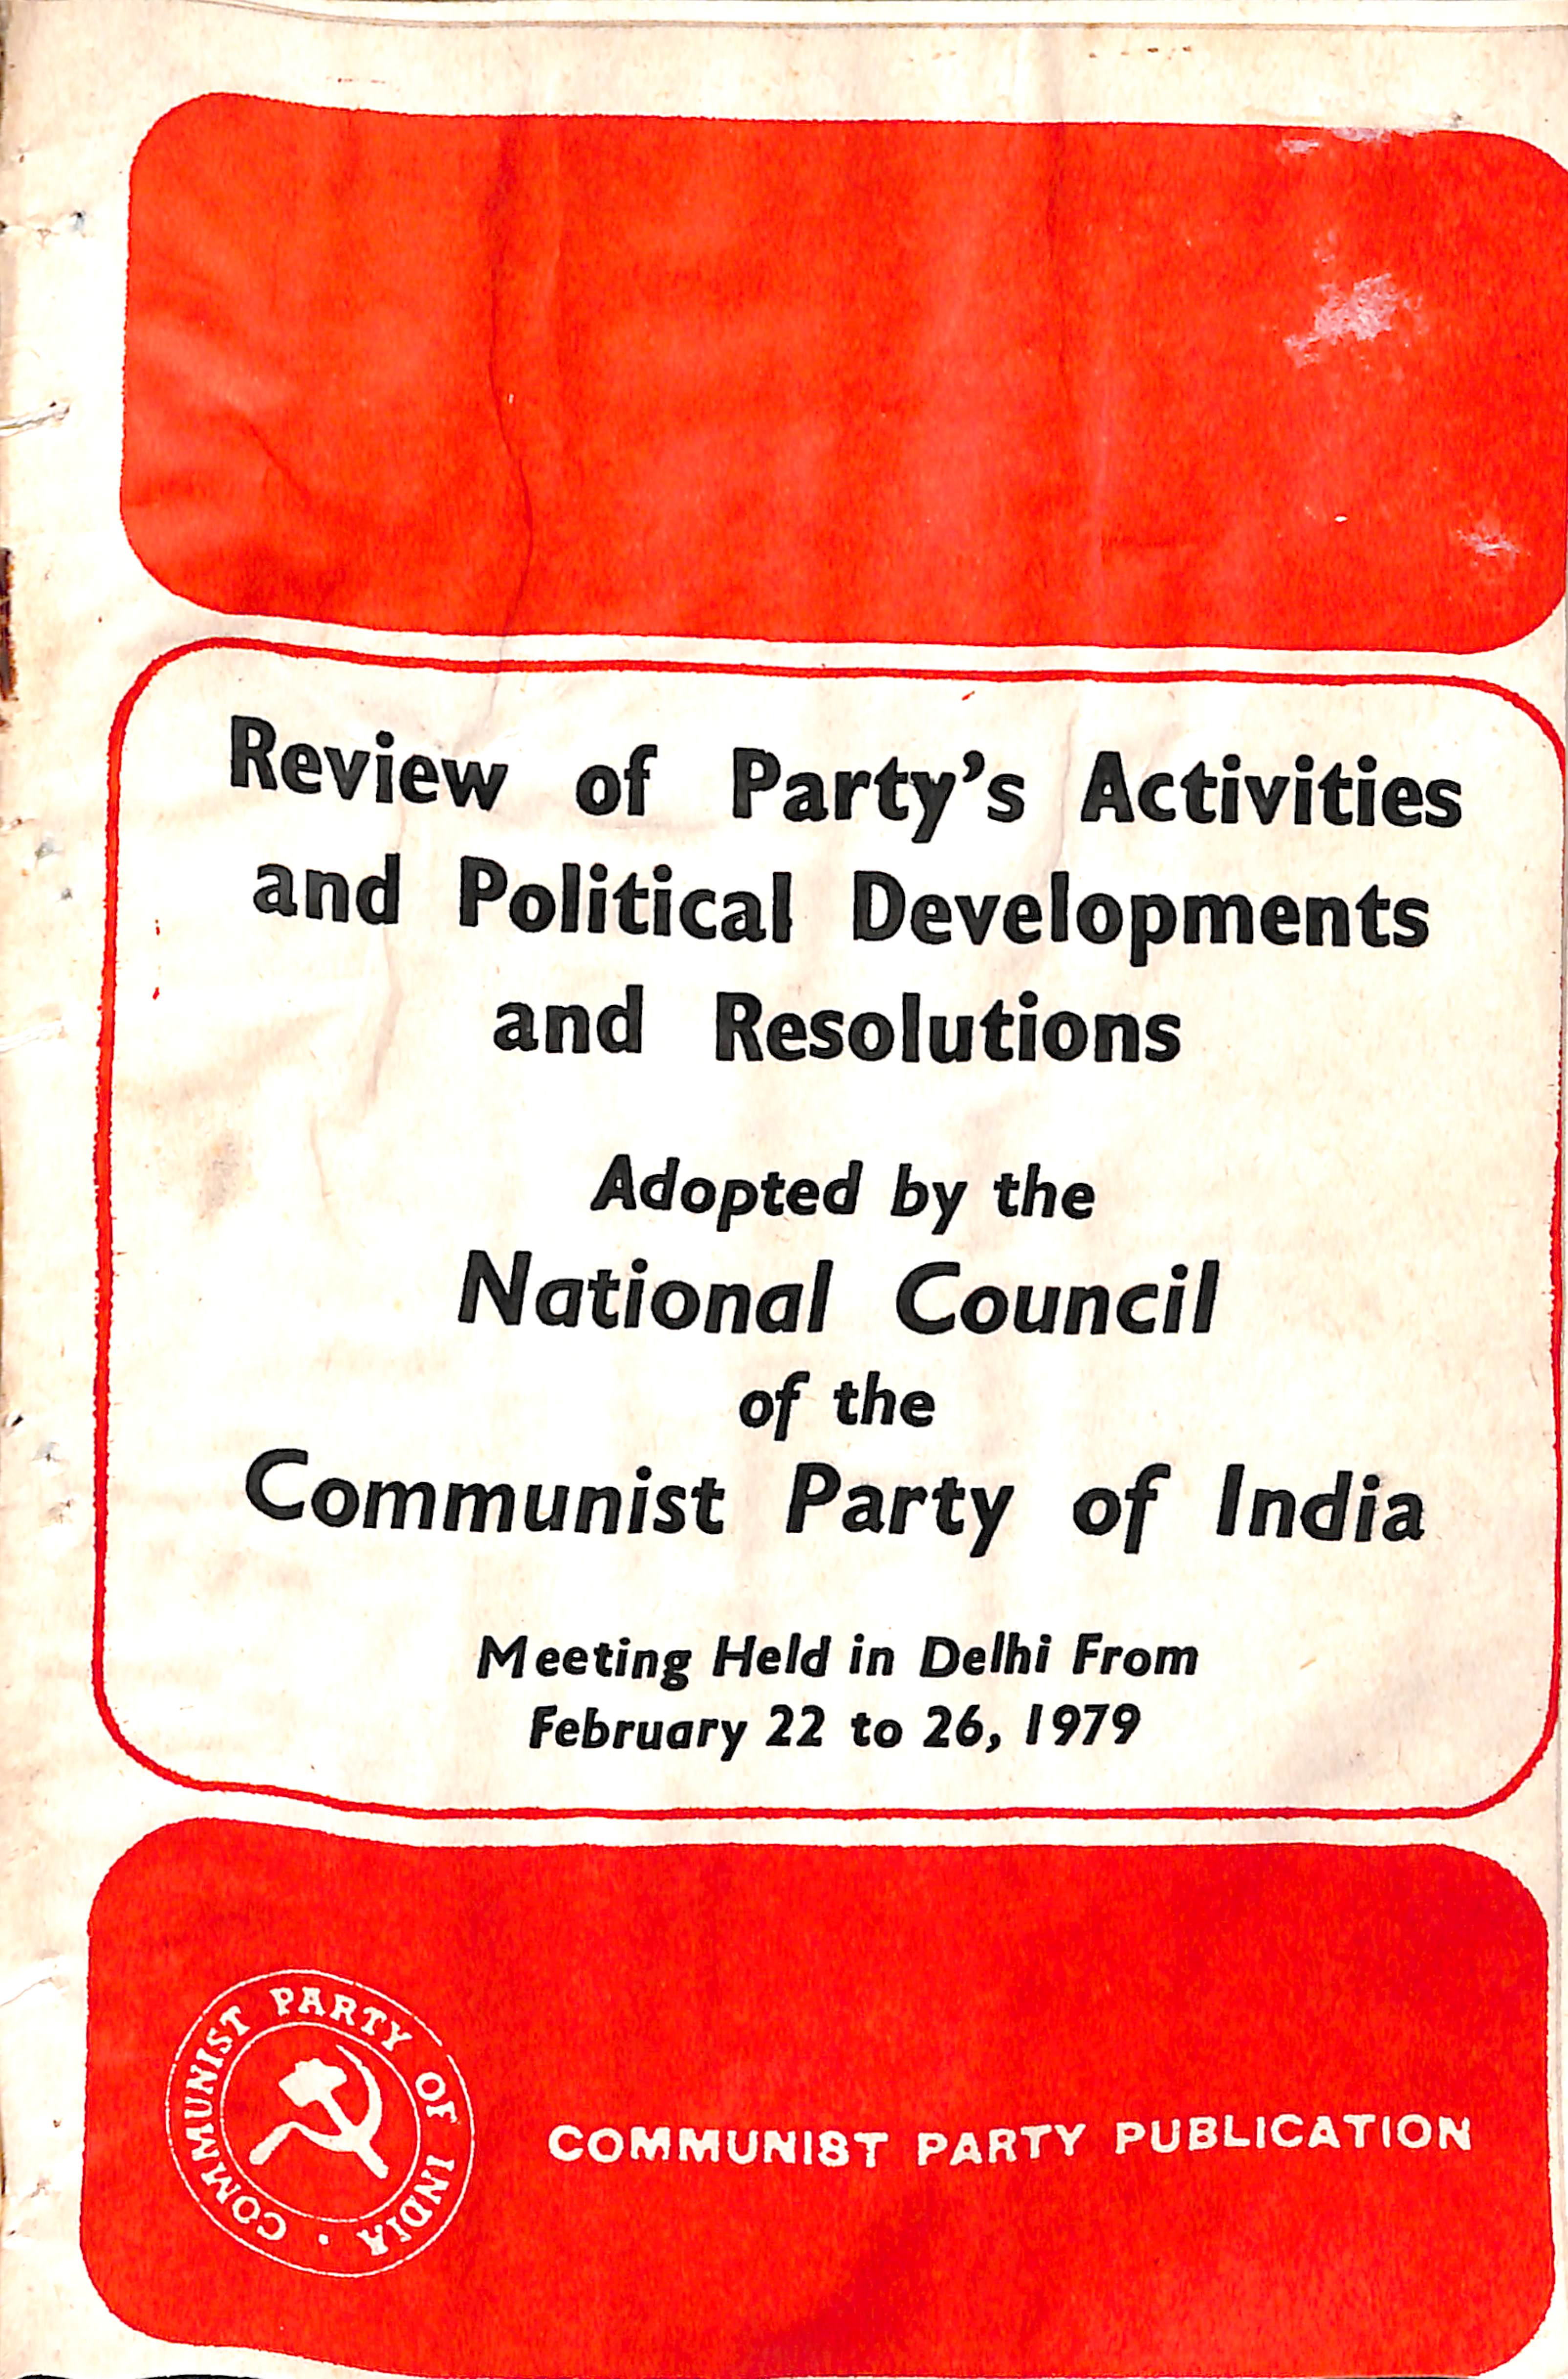 Review Of Party's Activities  And Political Developments And Resolutions Adopted By The National Council Of The Communist Party Of India (Meeting Held In Delhi From Frbruary 22 To 26, 1979)